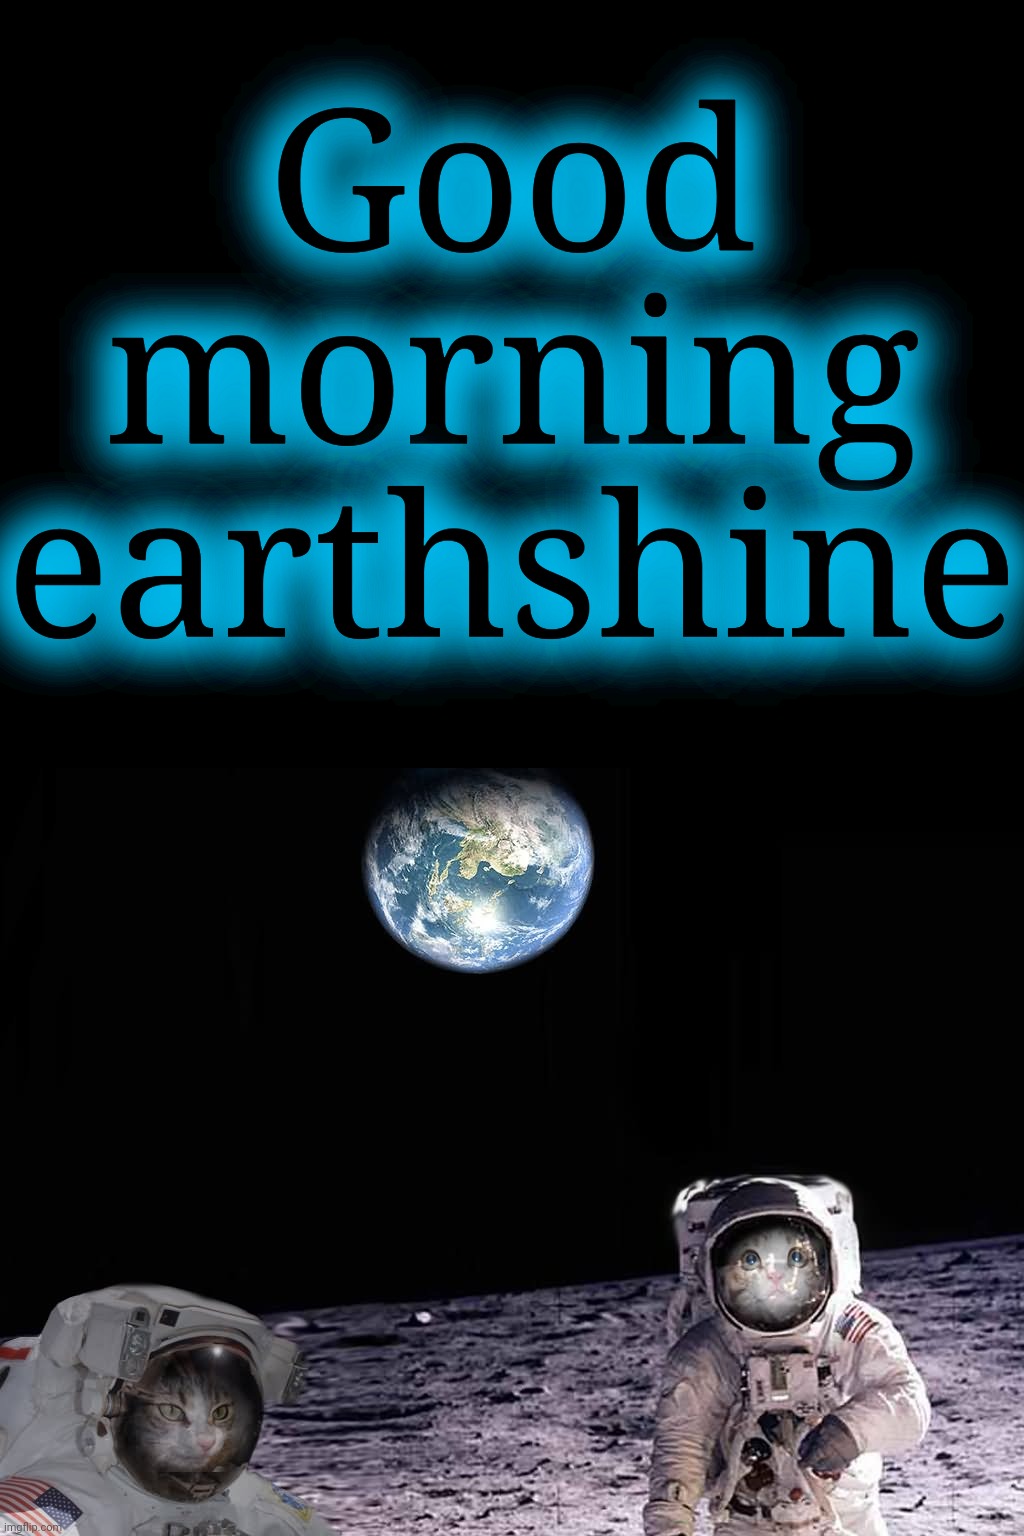 Kitty Cats astronauts space on moon | Good morning earthshine | image tagged in kitty cats astronauts space on moon | made w/ Imgflip meme maker